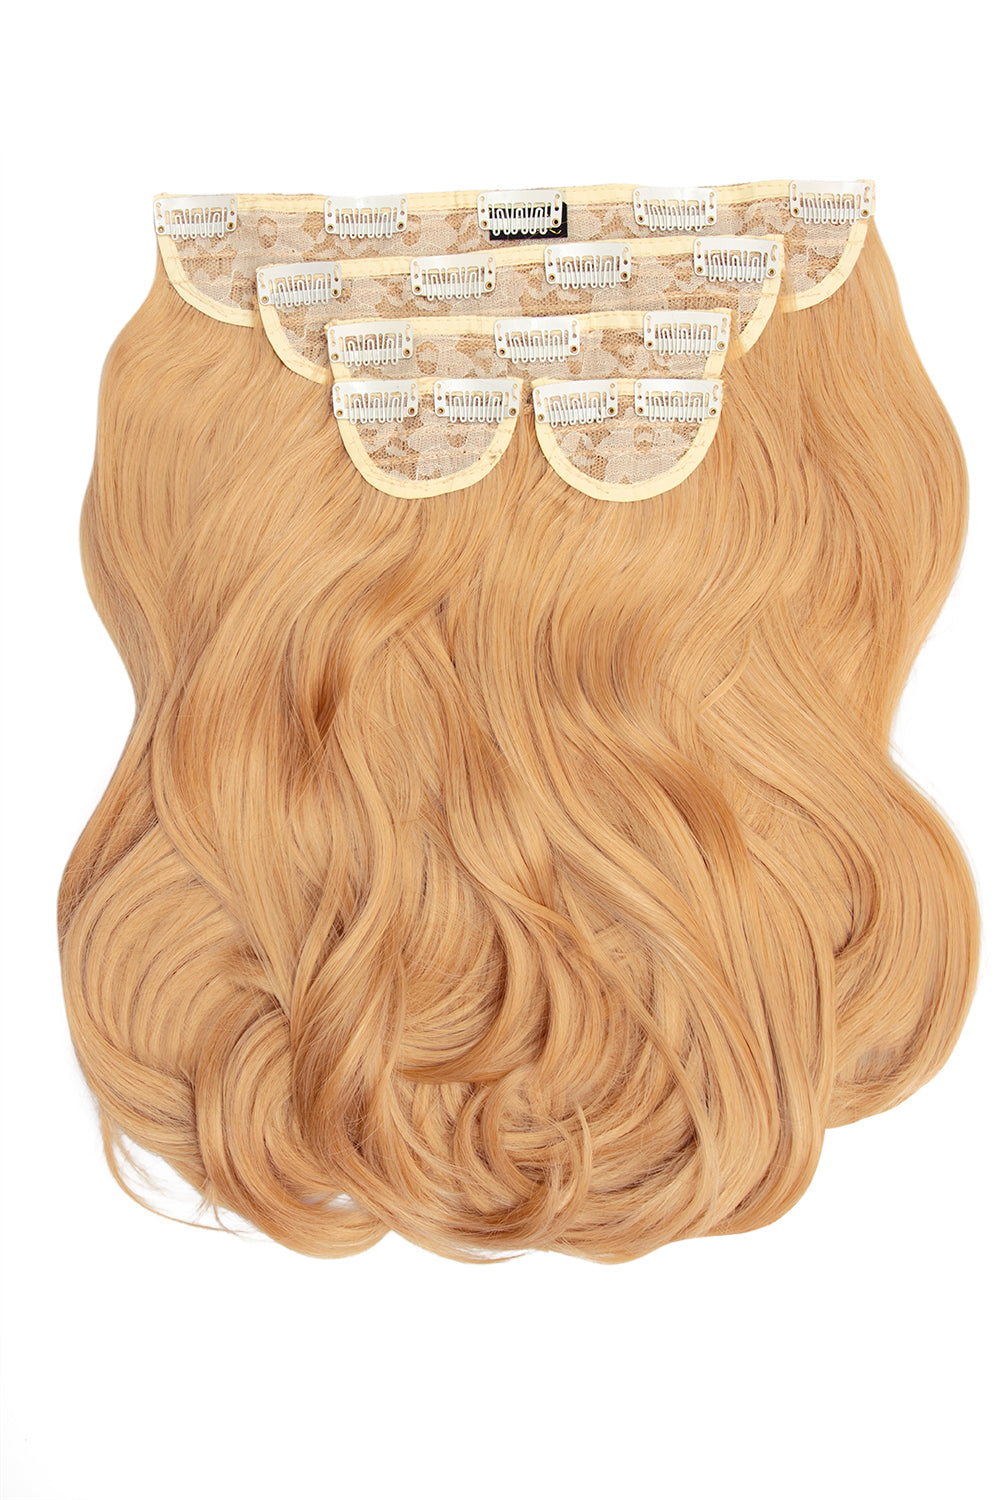 Super Thick 16" 5 Piece Blow Dry Wavy Clip In Hair Extensions - Caramel Blonde